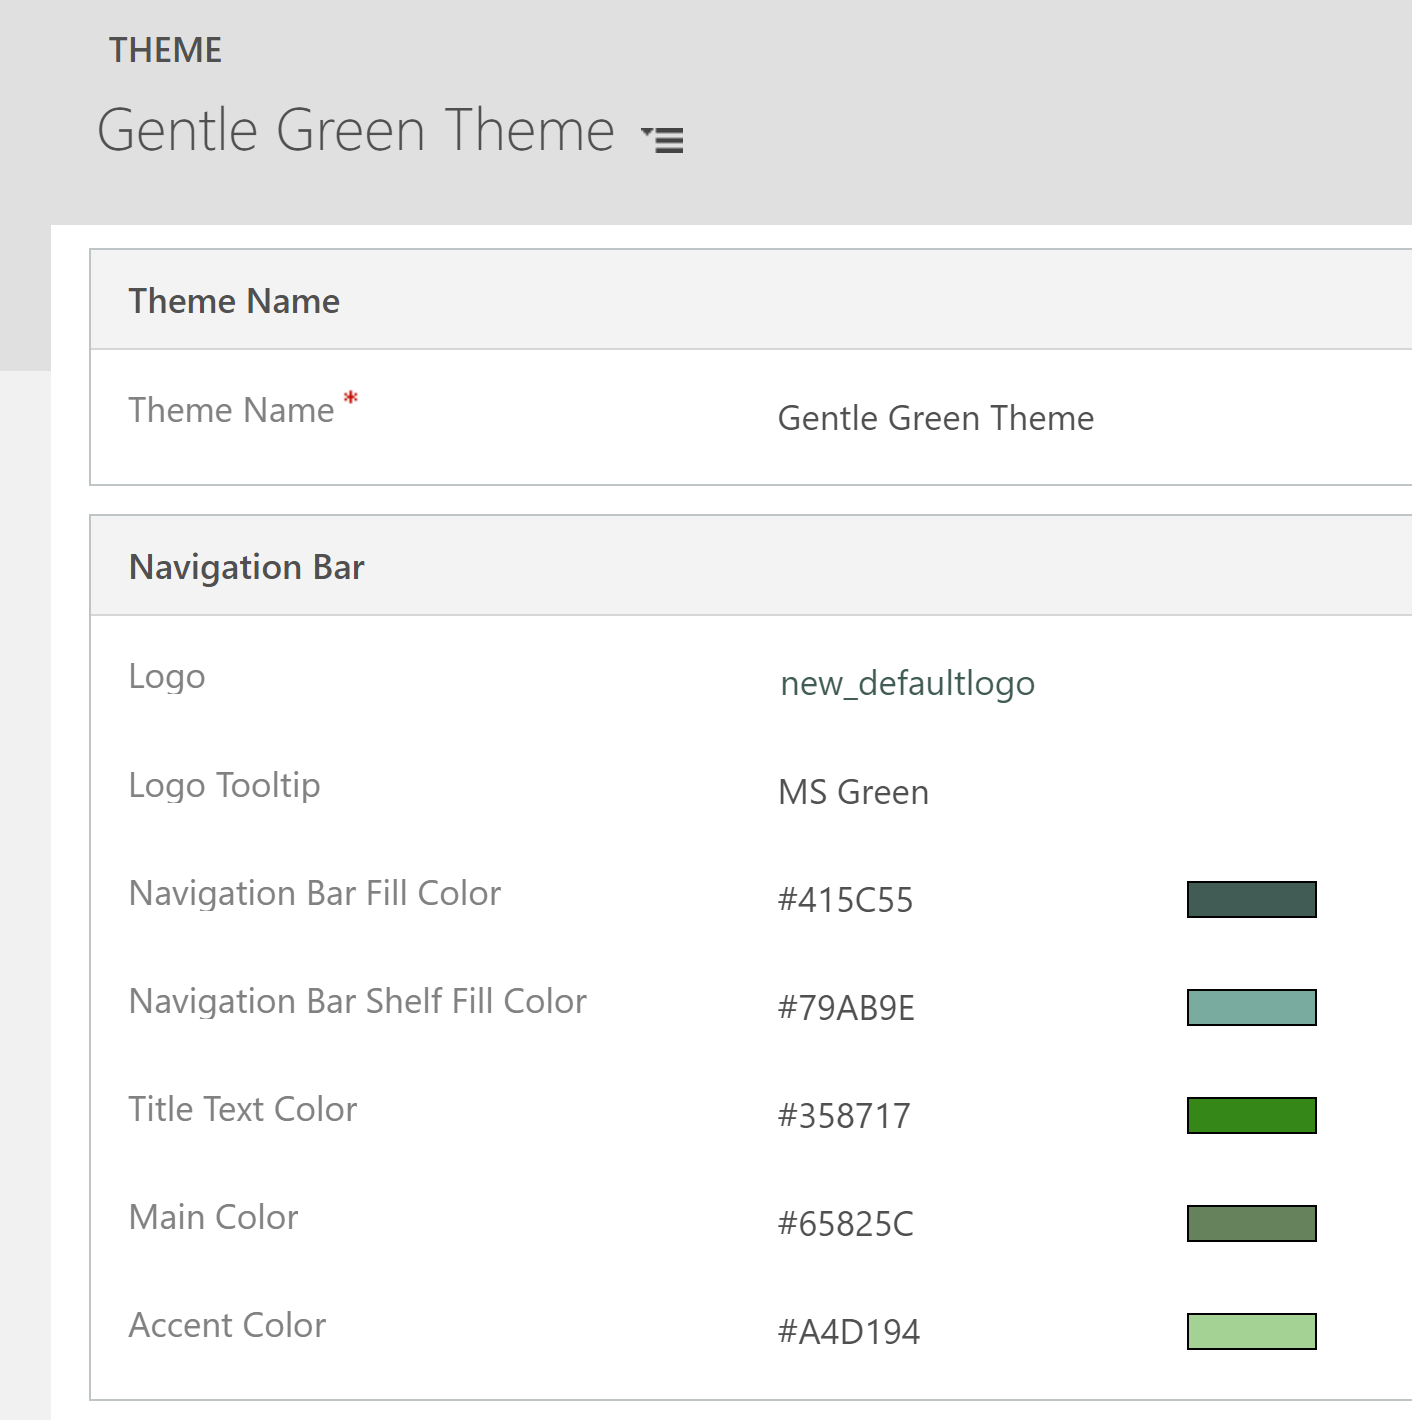 Gentle green theme colors for navigation bar.